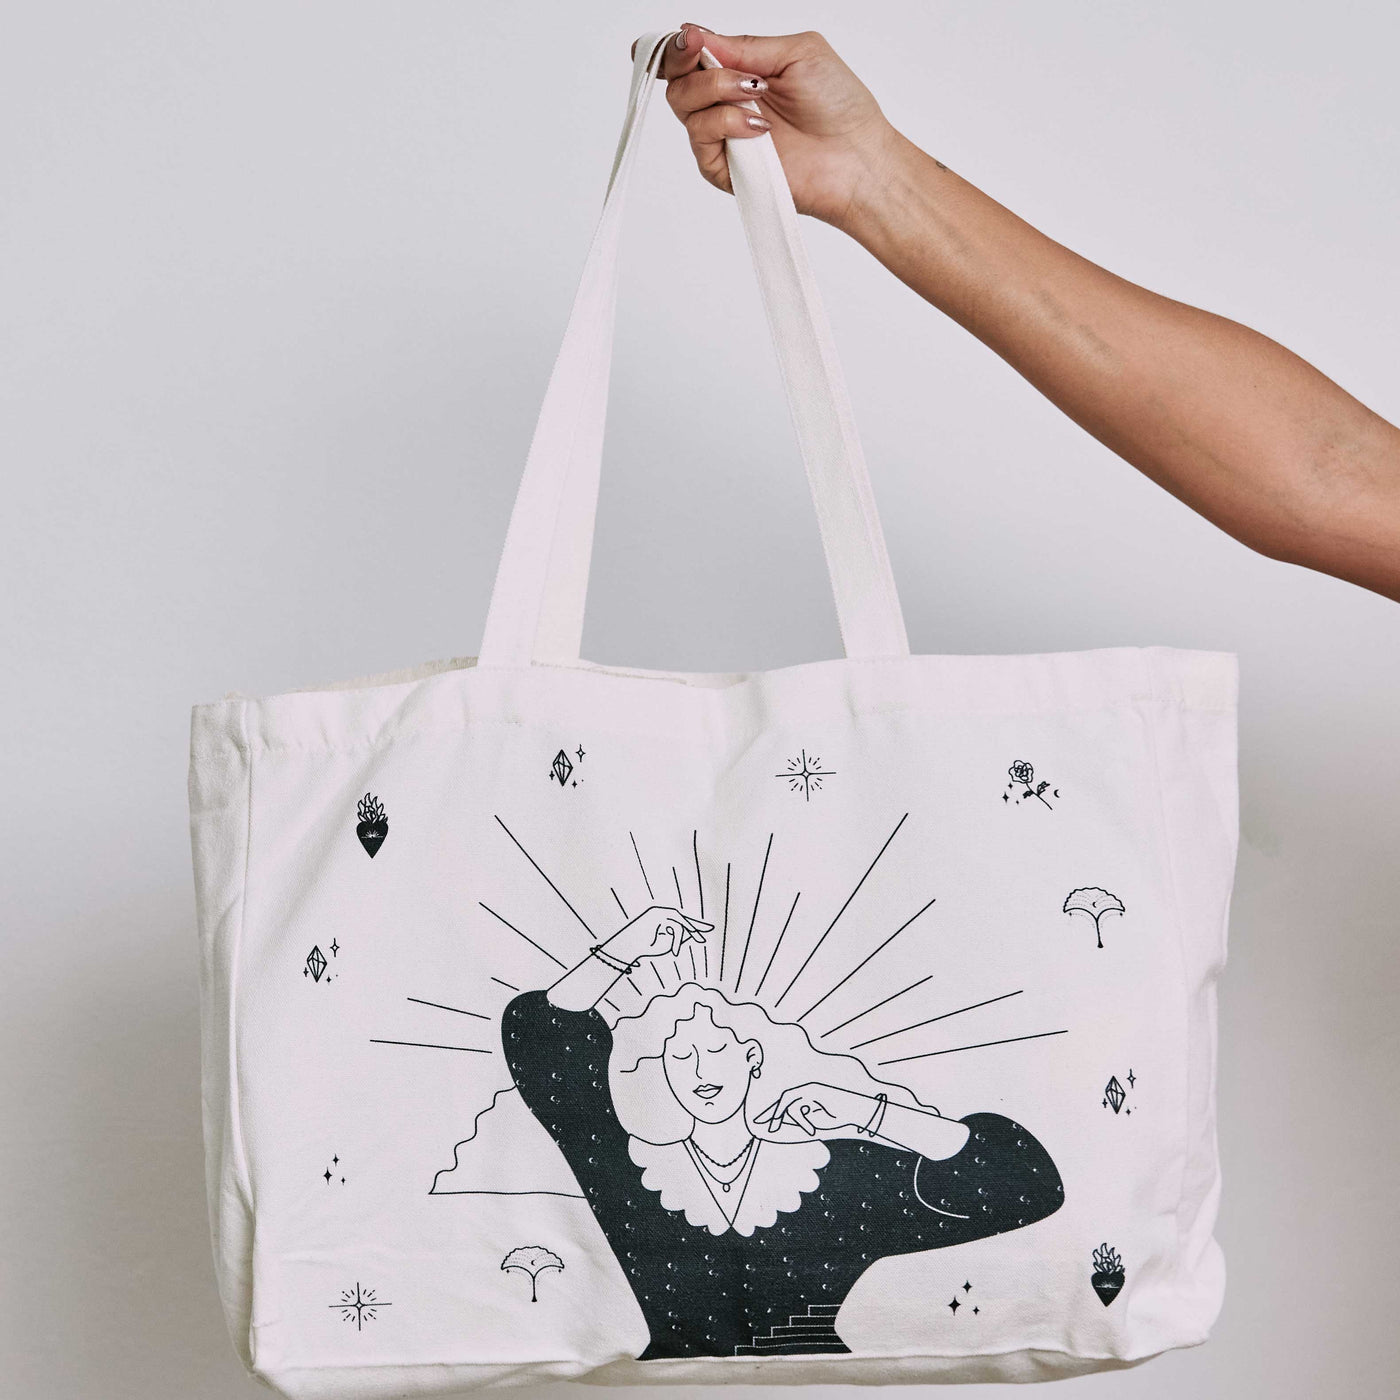 Create Your Own Sunshine Tote Bag